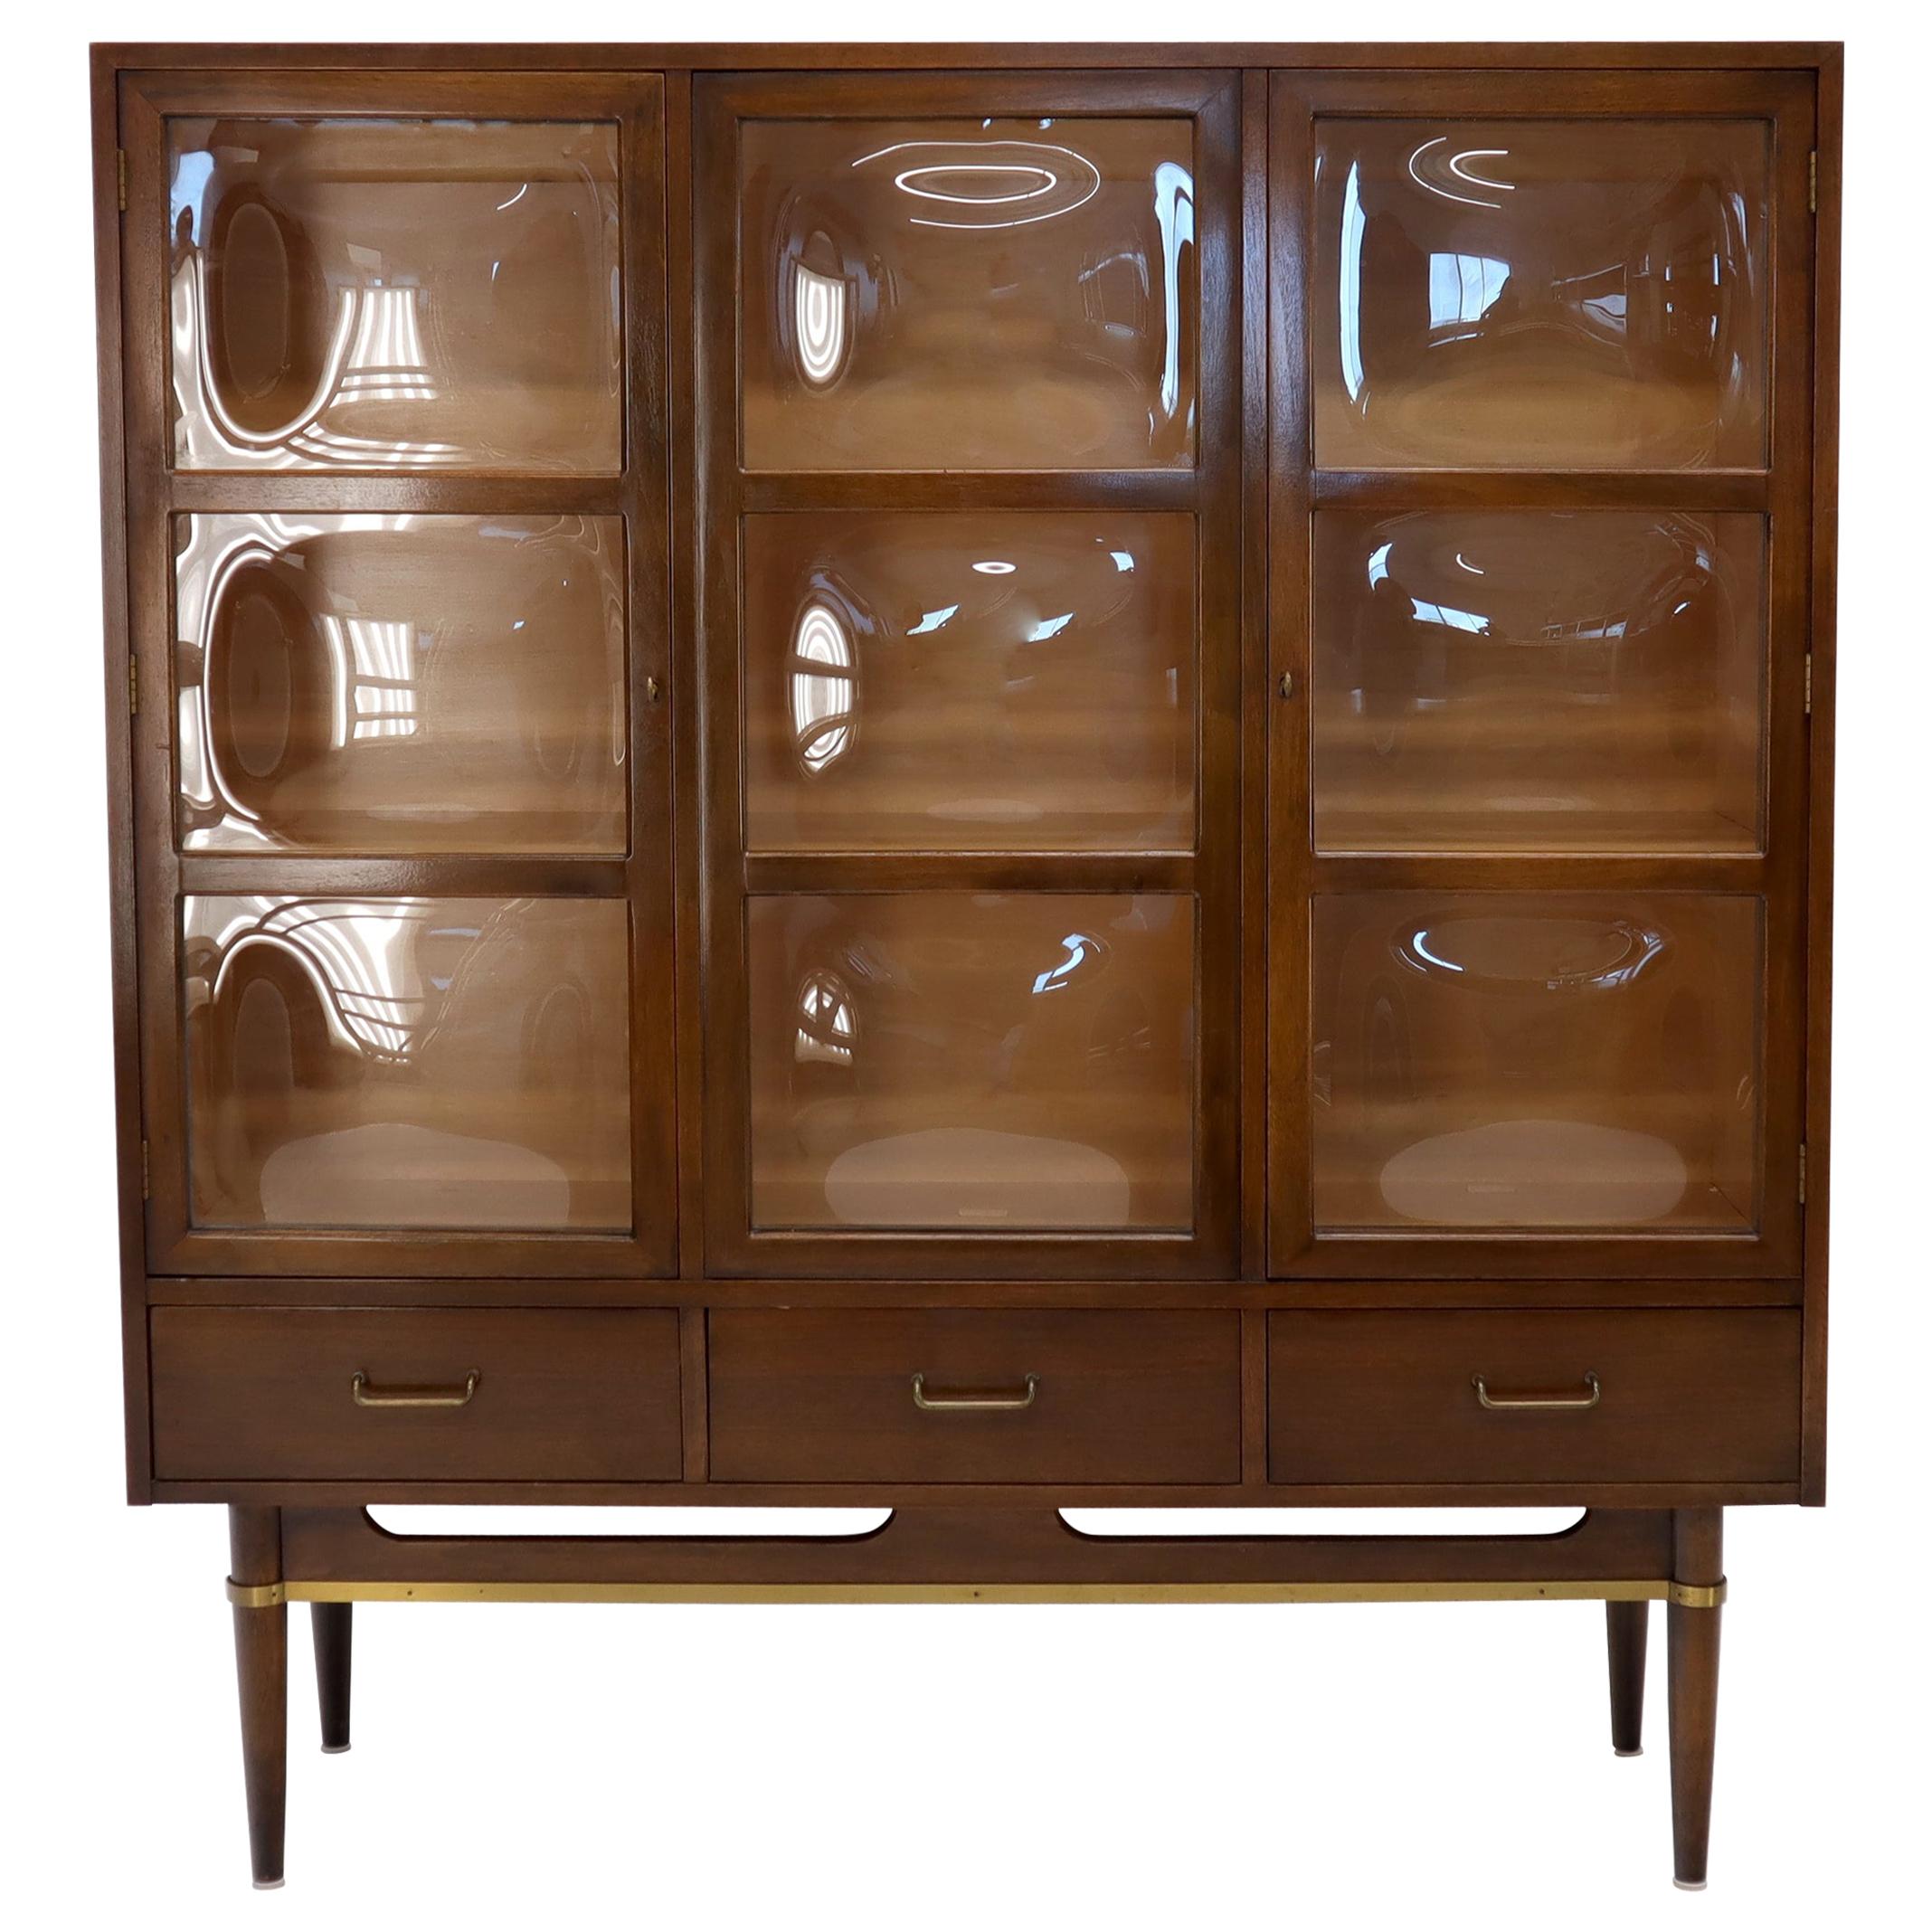 Rare 3 Bubble Glass Doors Mid-Century Modern Bookcase Wall Unit Display Cabinet